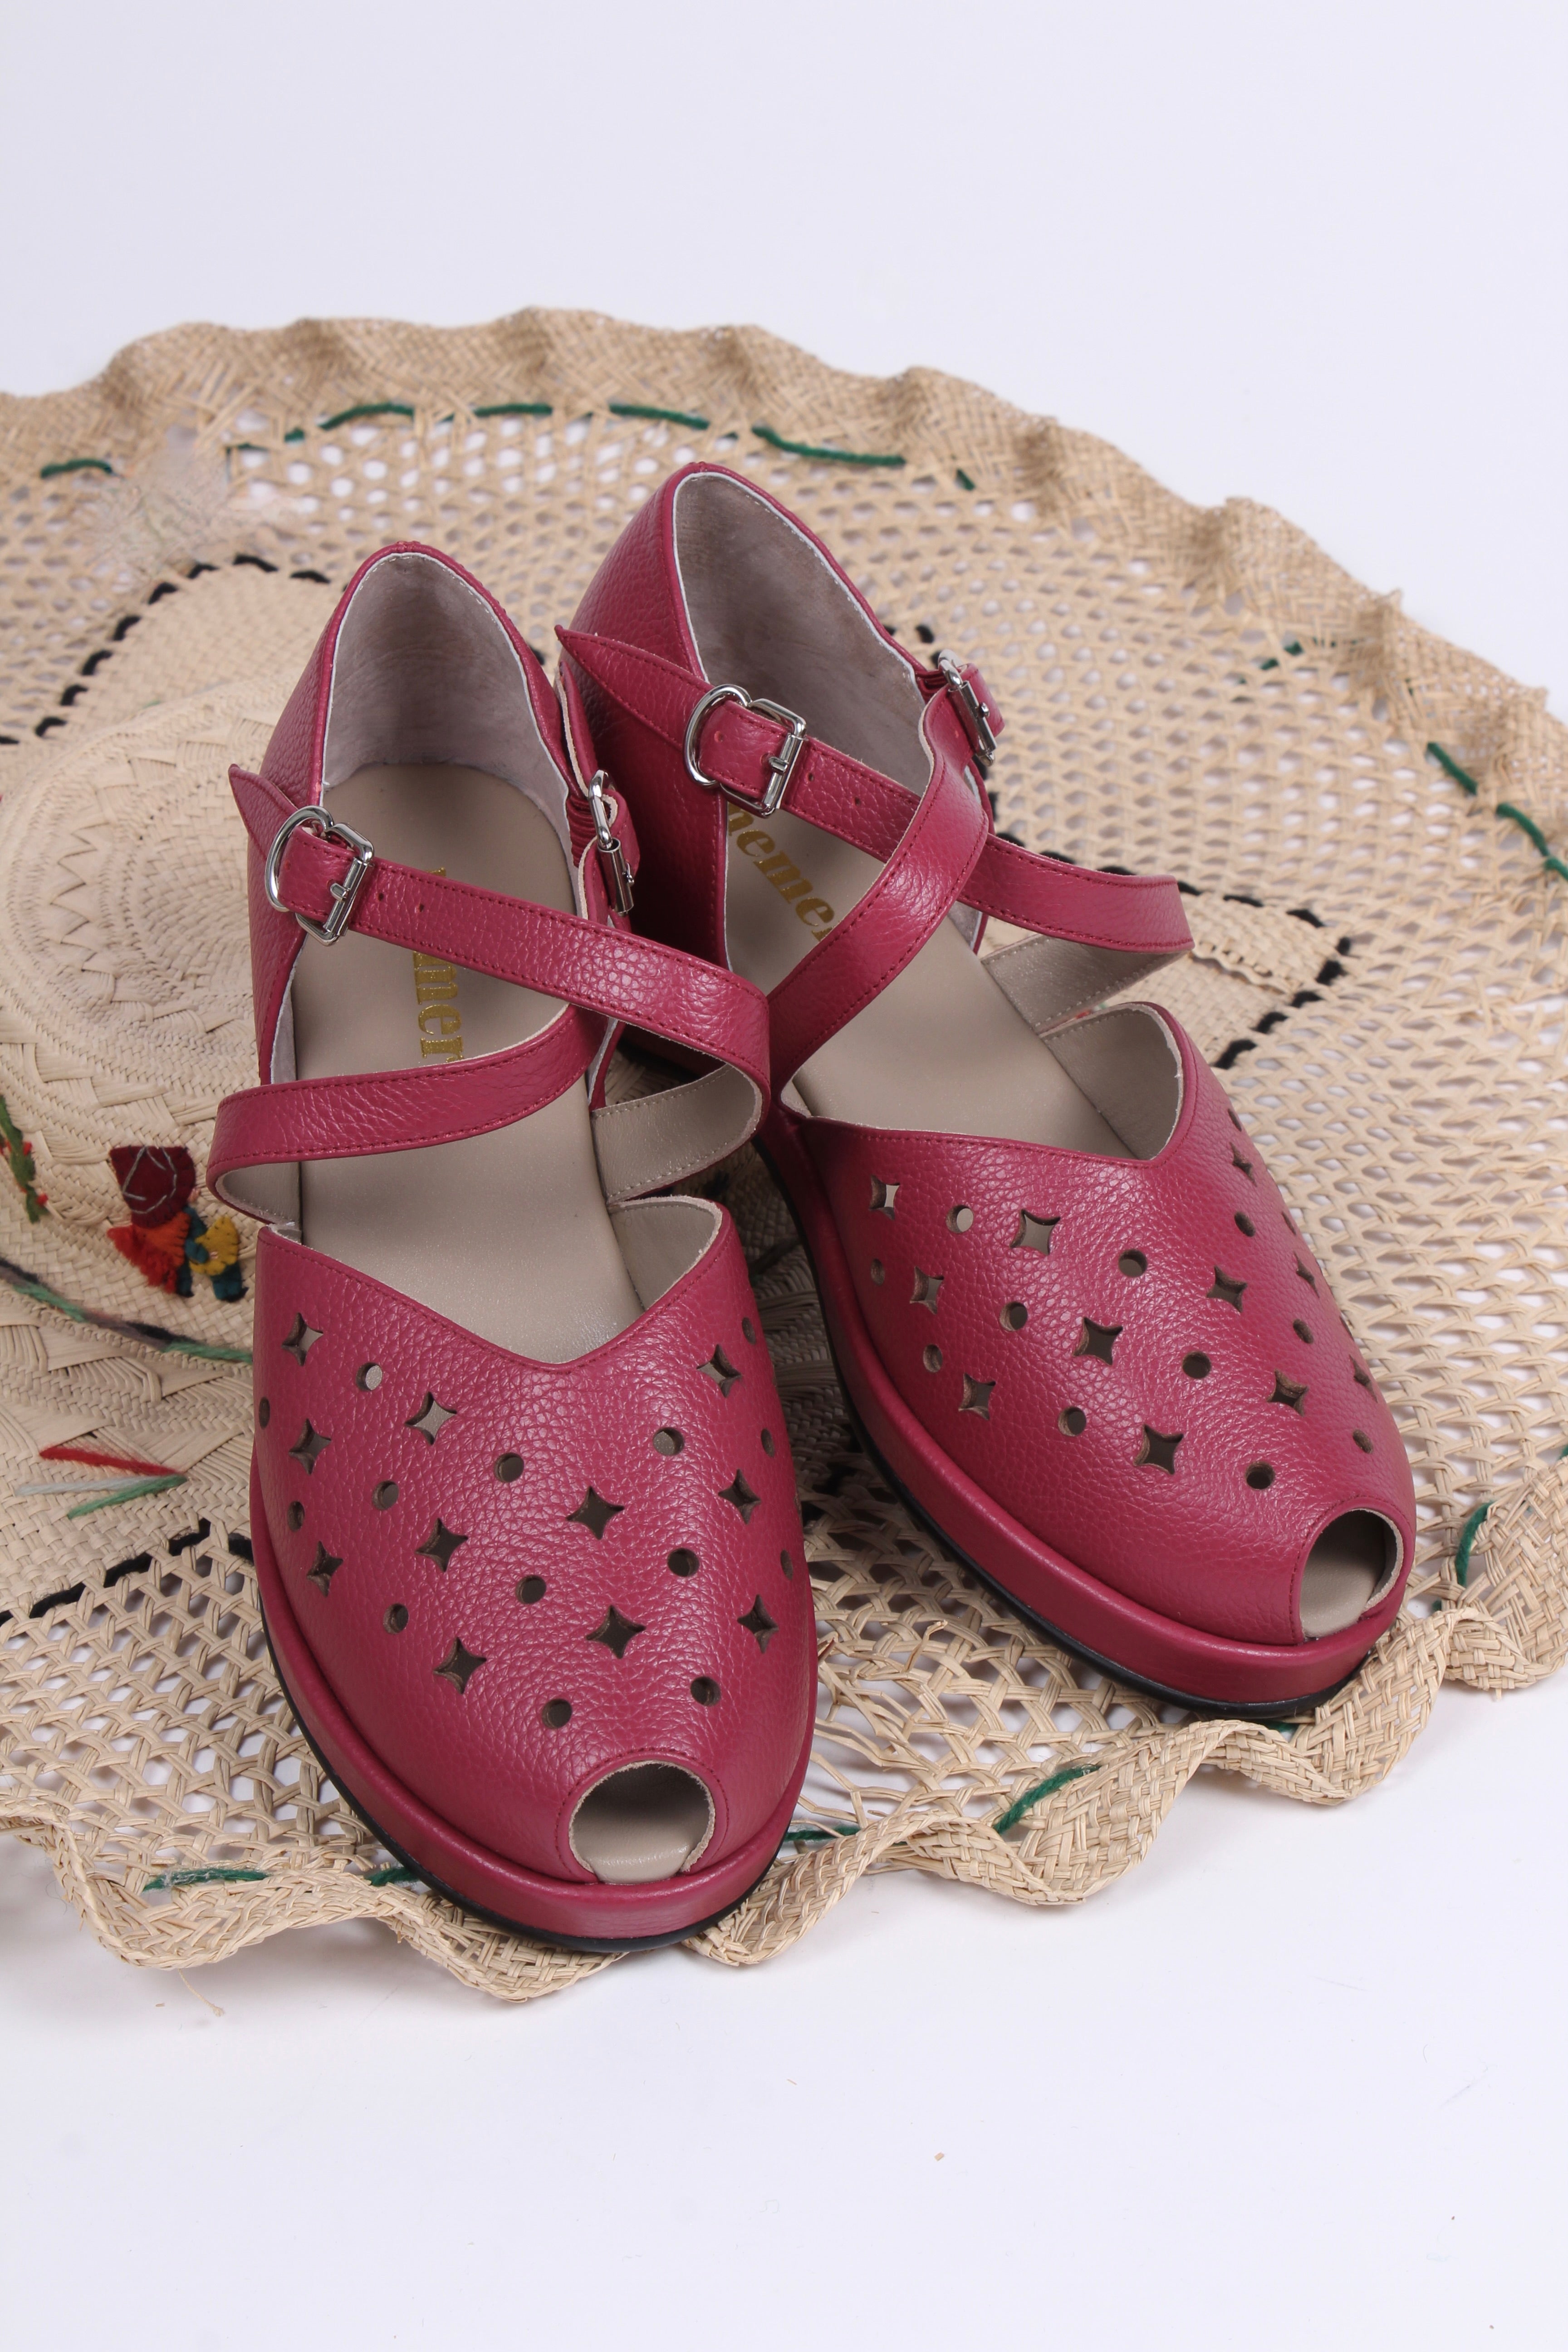 1940s style summer sandals /  wedges - Burgundy / Raspberry - Norma